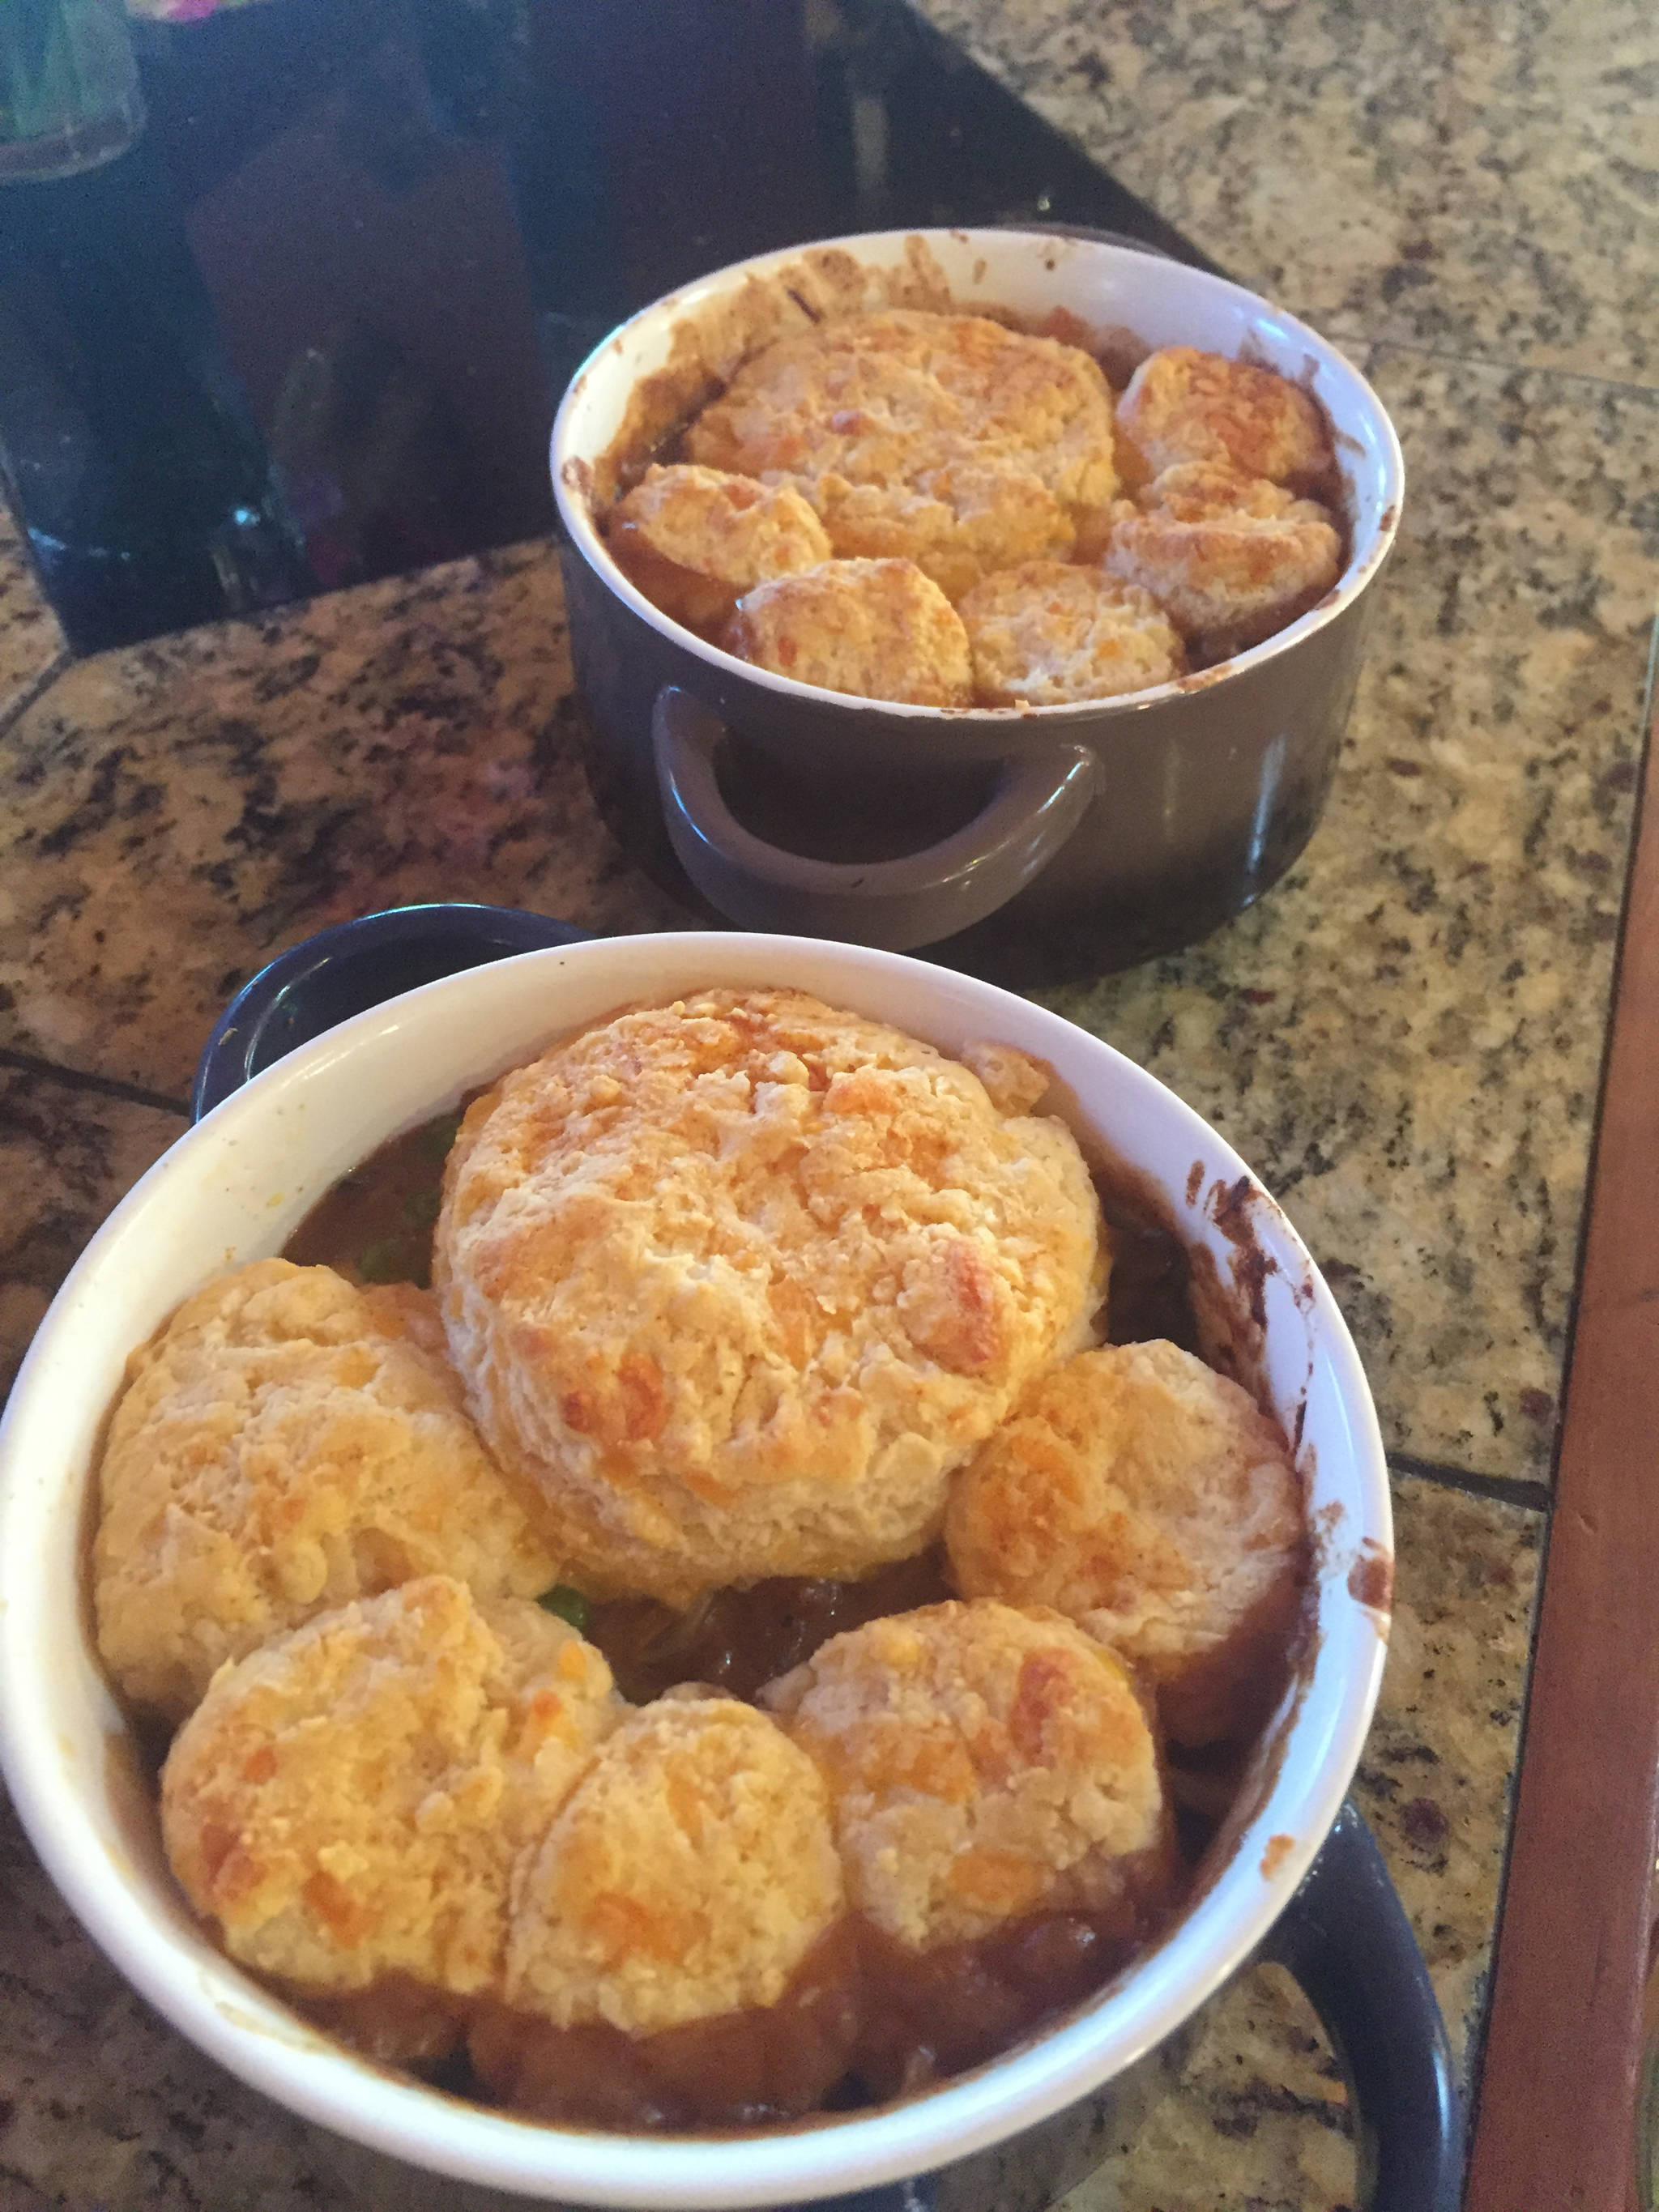 Teri Robl’s beef pot pie incorporates Alaska moose meat with locally grown vegetables. (Photo by Teri Robl)